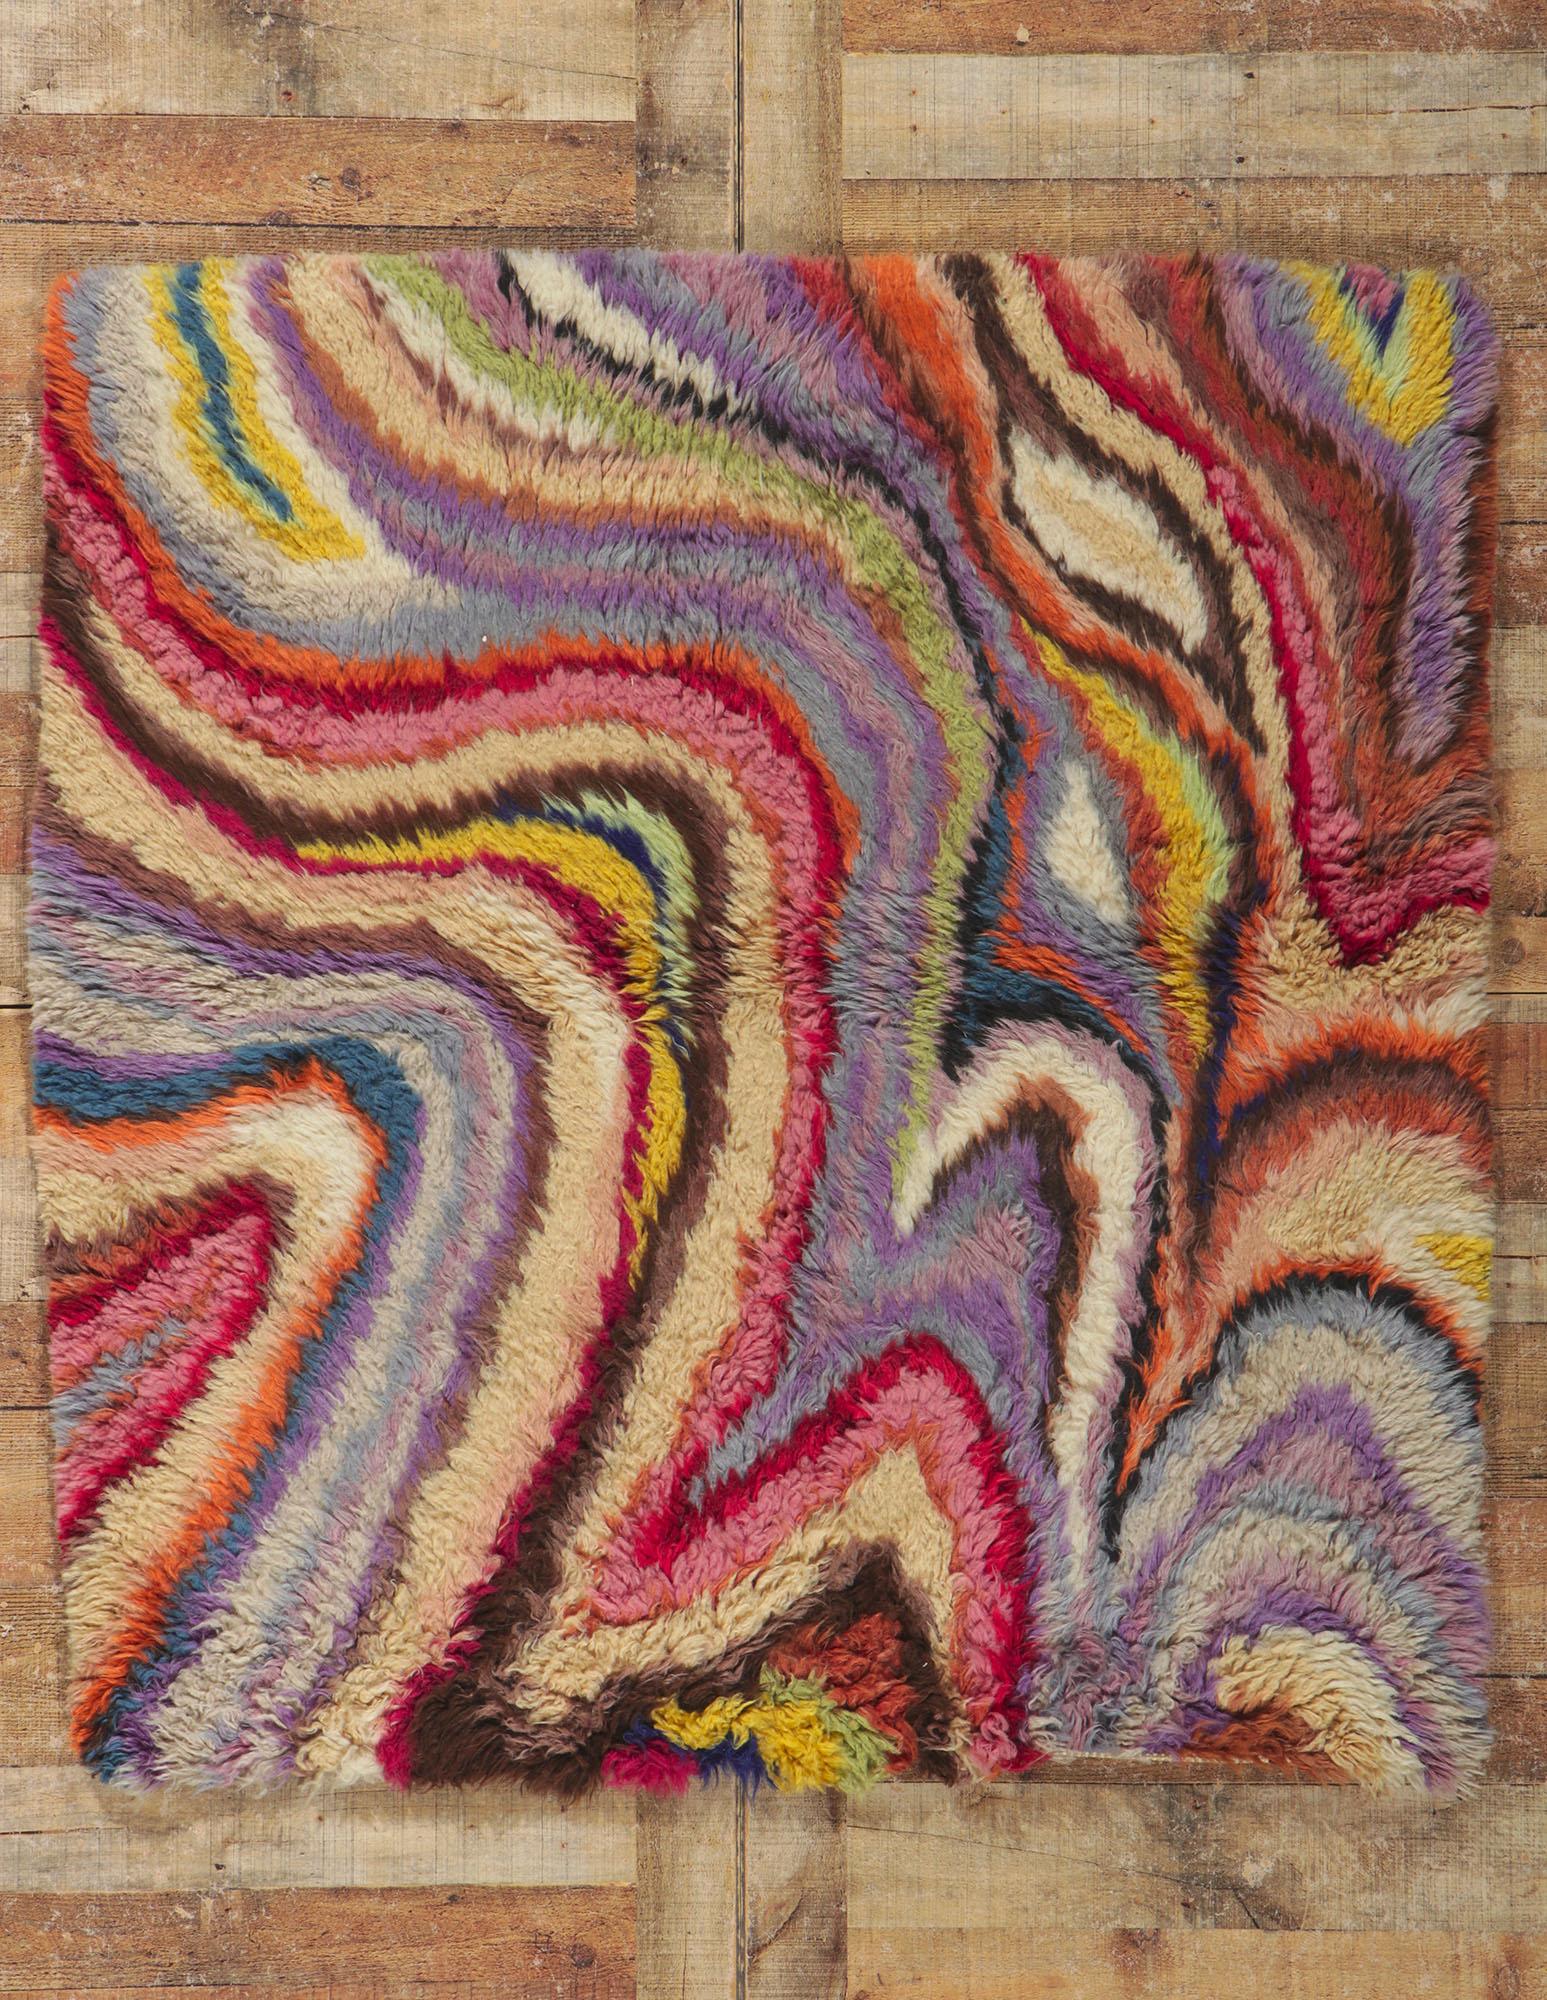 20th Century Vintage Swedish Rya Swirl Rug with Abstract Expressionist Style For Sale